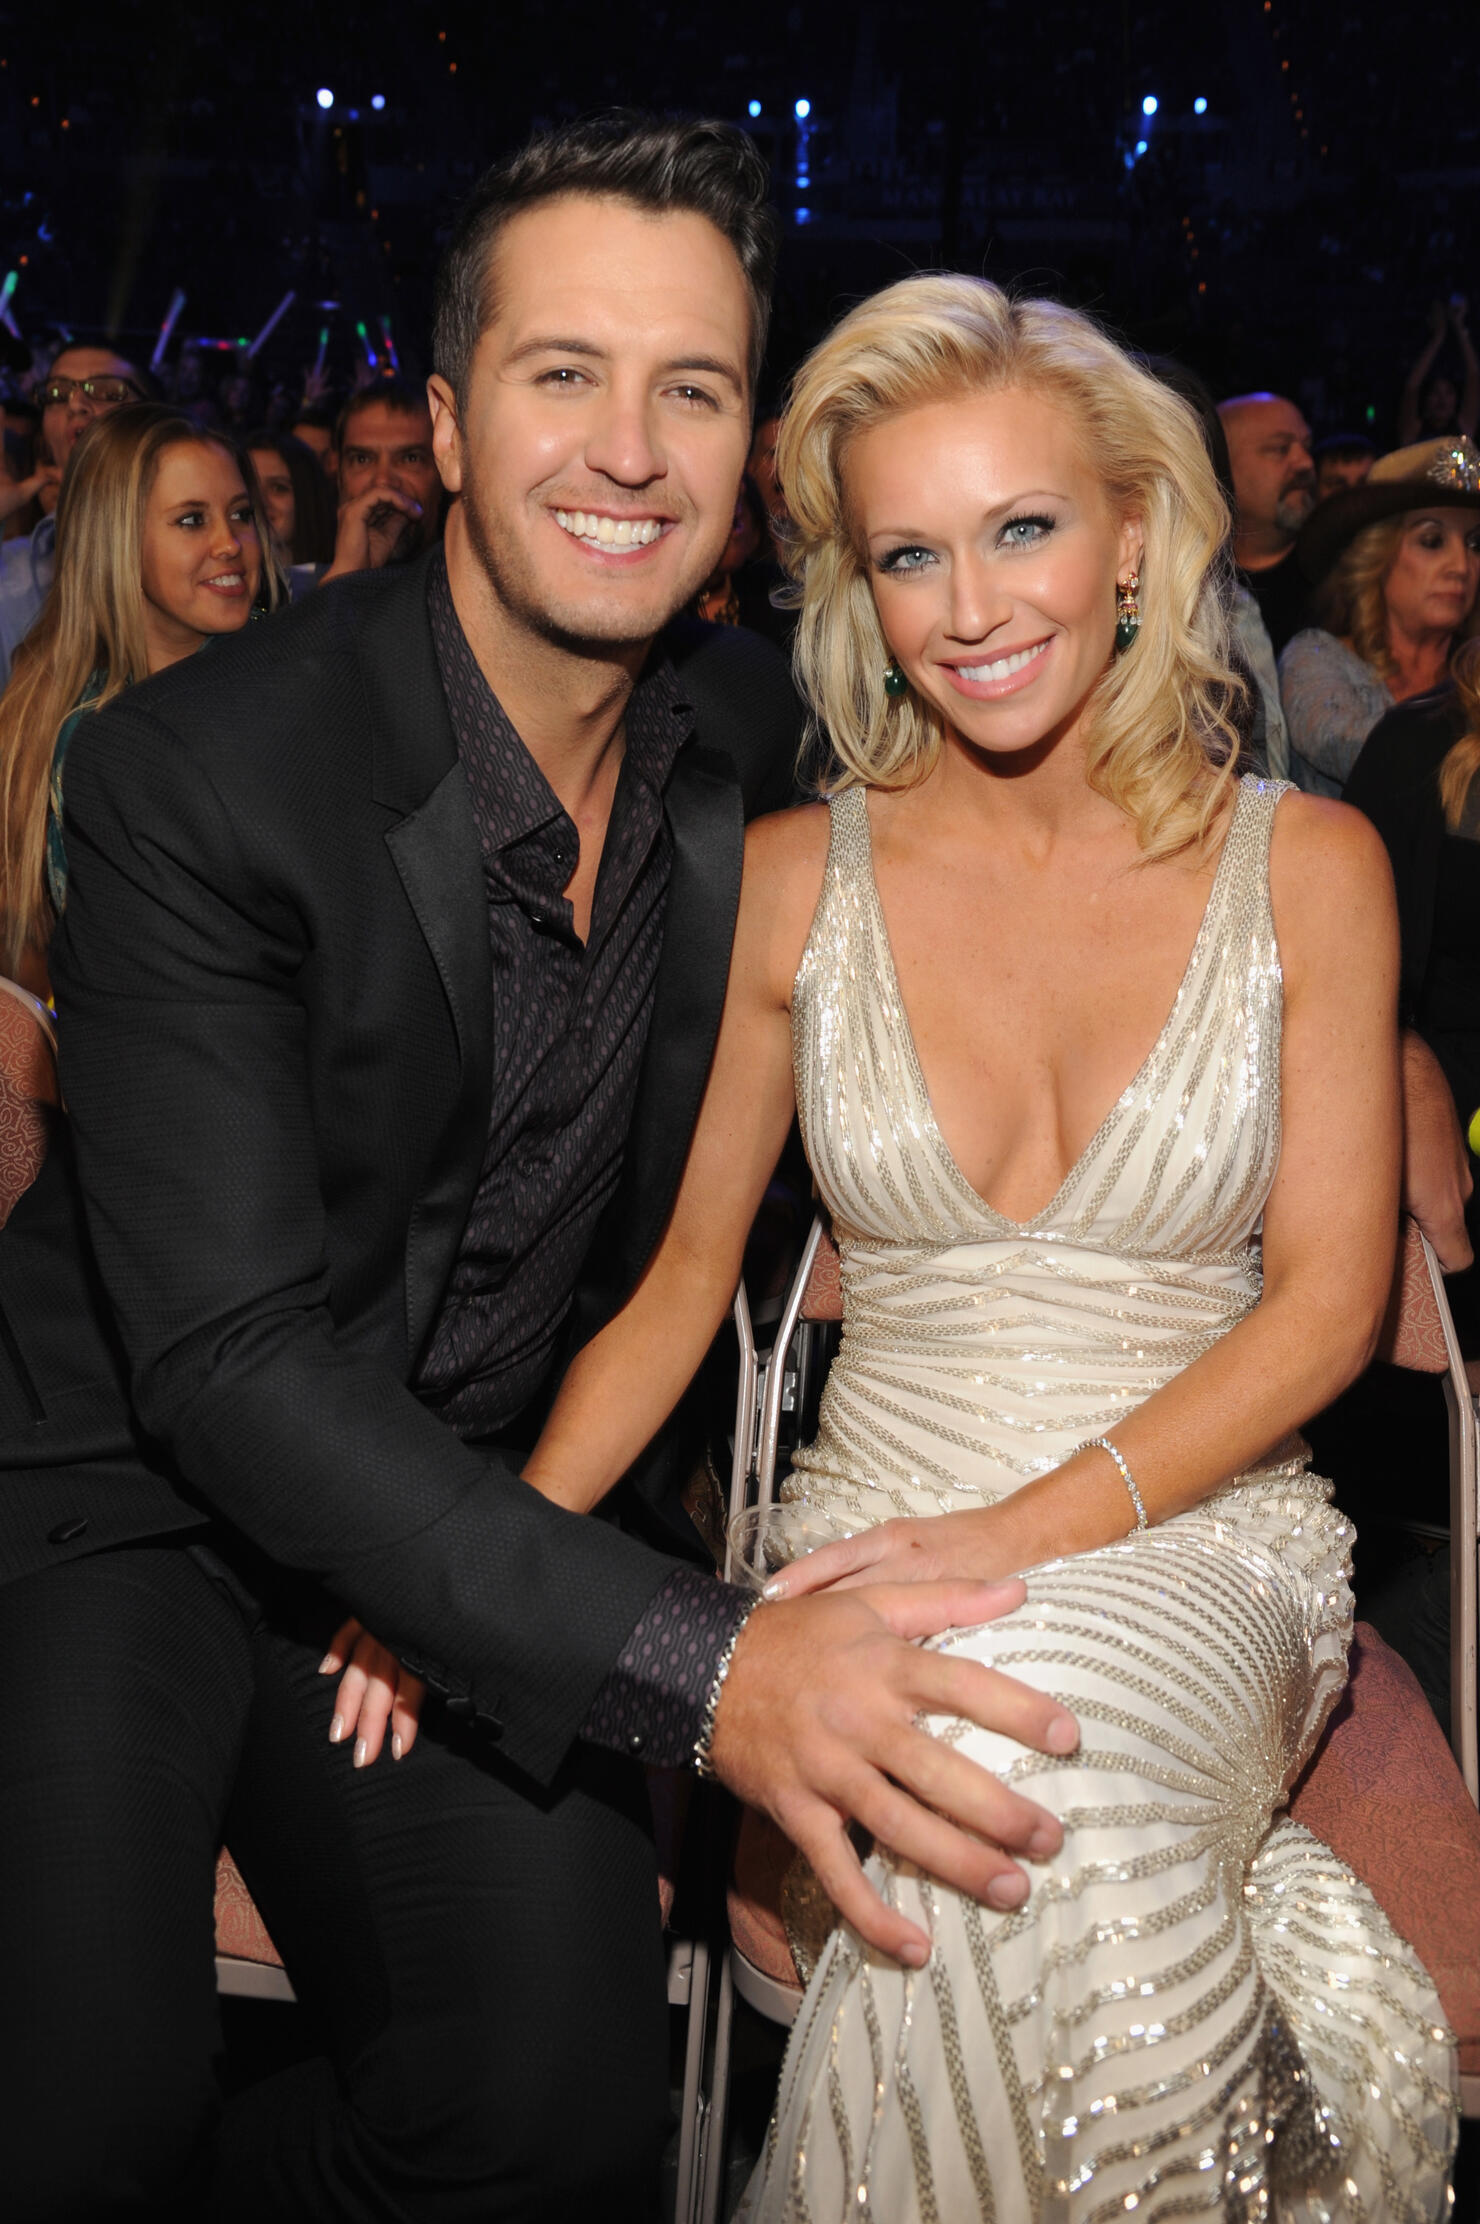 American Country Awards 2013 - Backstage And Audience